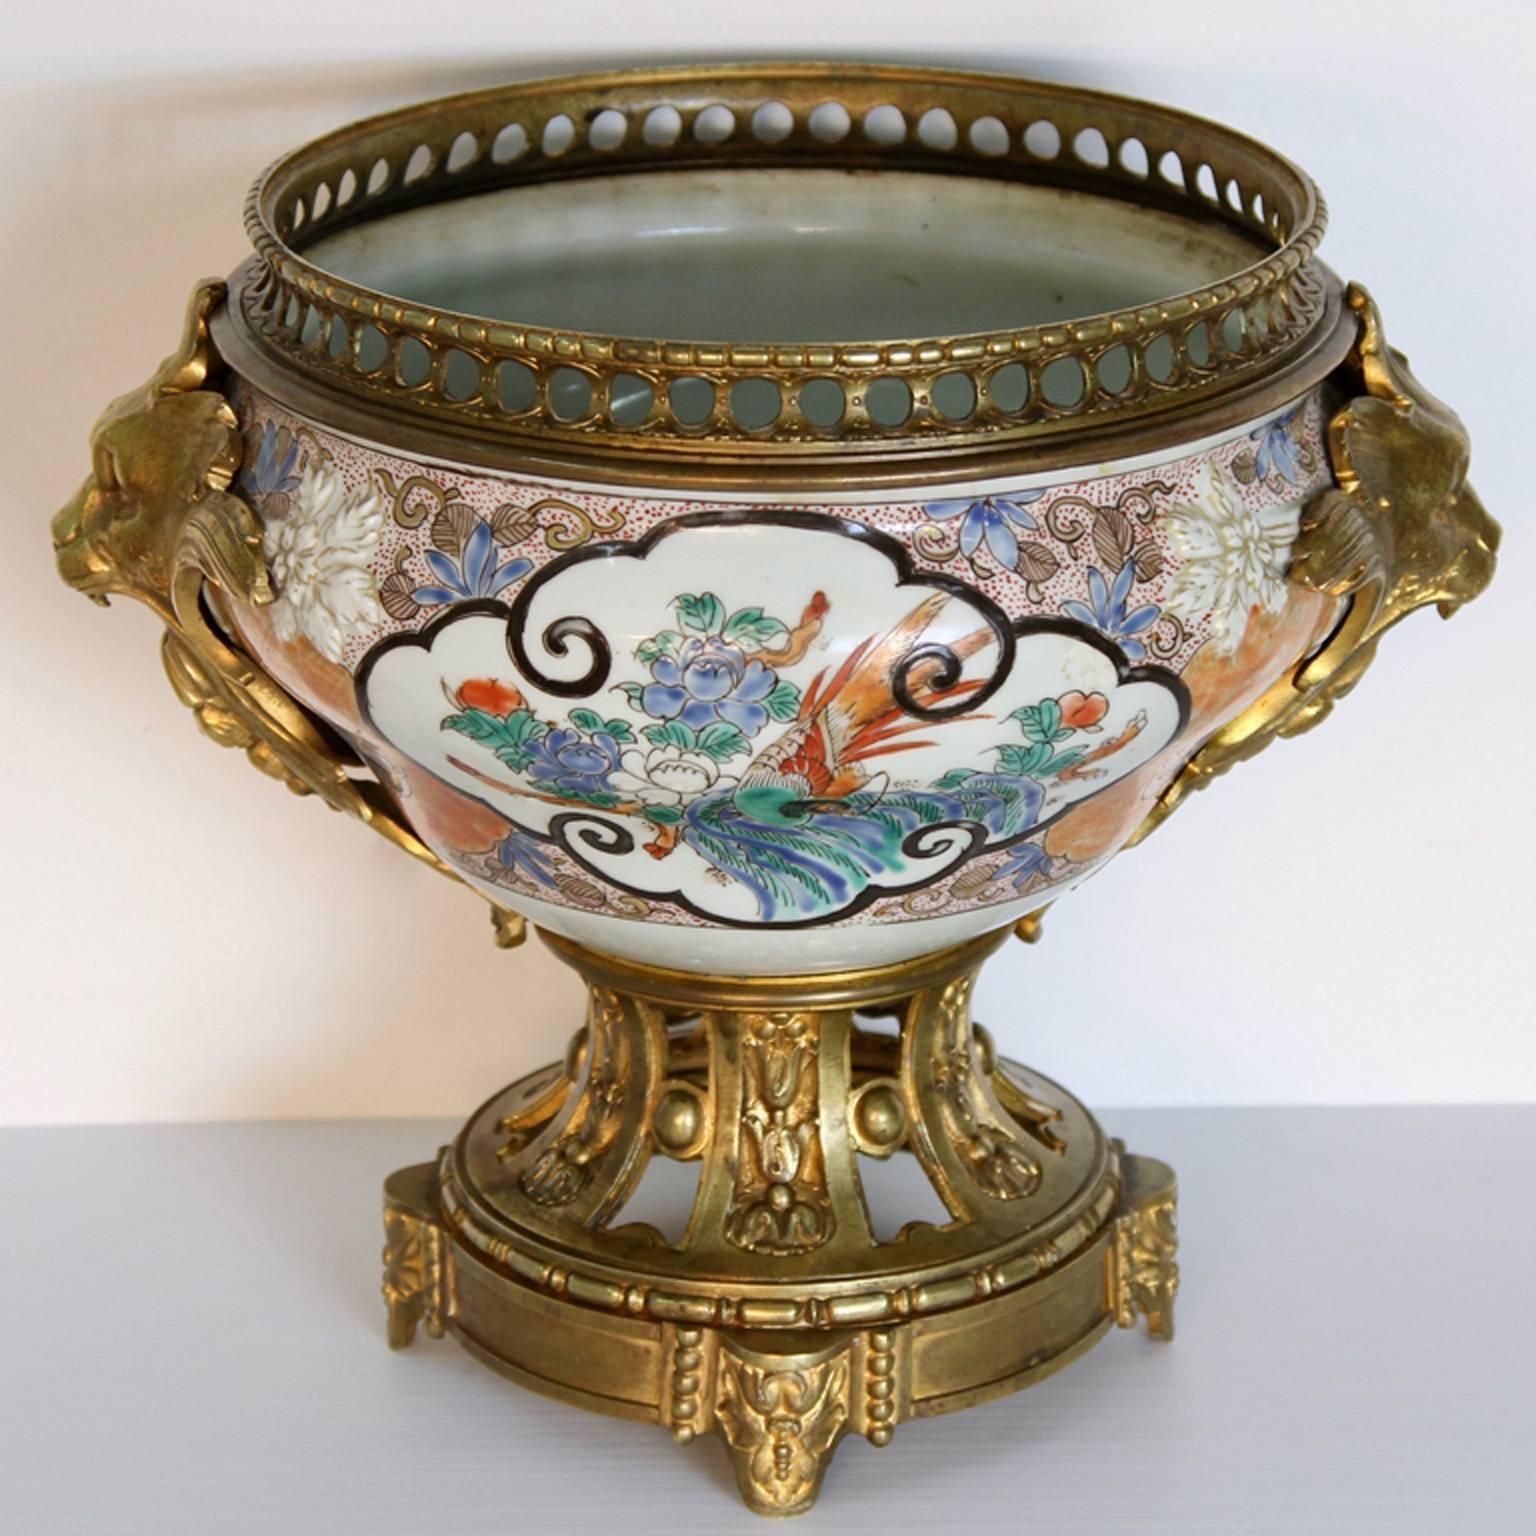 An Oriental porcelain centerpiece, signed, with mercury guided French doré bronze ormolu mounts, circa 1700s-early 1800s. Having golden bronze ferocious lion mounts on the side with a reticulated bronze base supporting the museum quality oriental